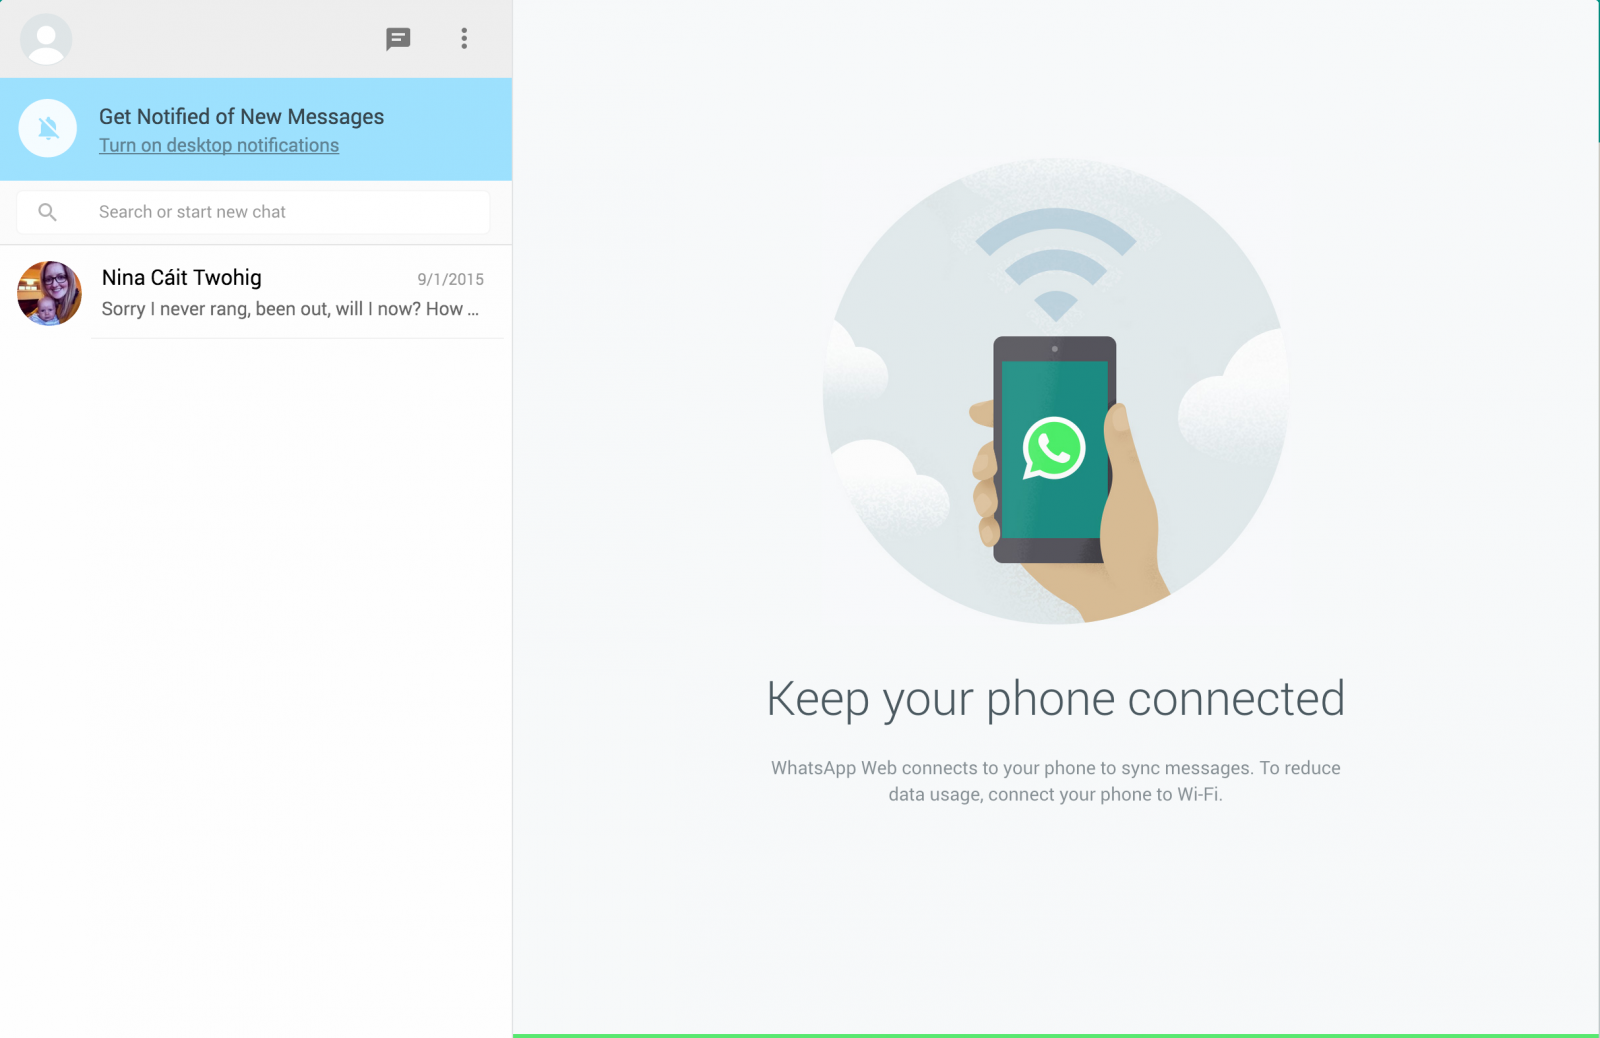 Whatsapp Web How To Use Whatsapp On Your Pc